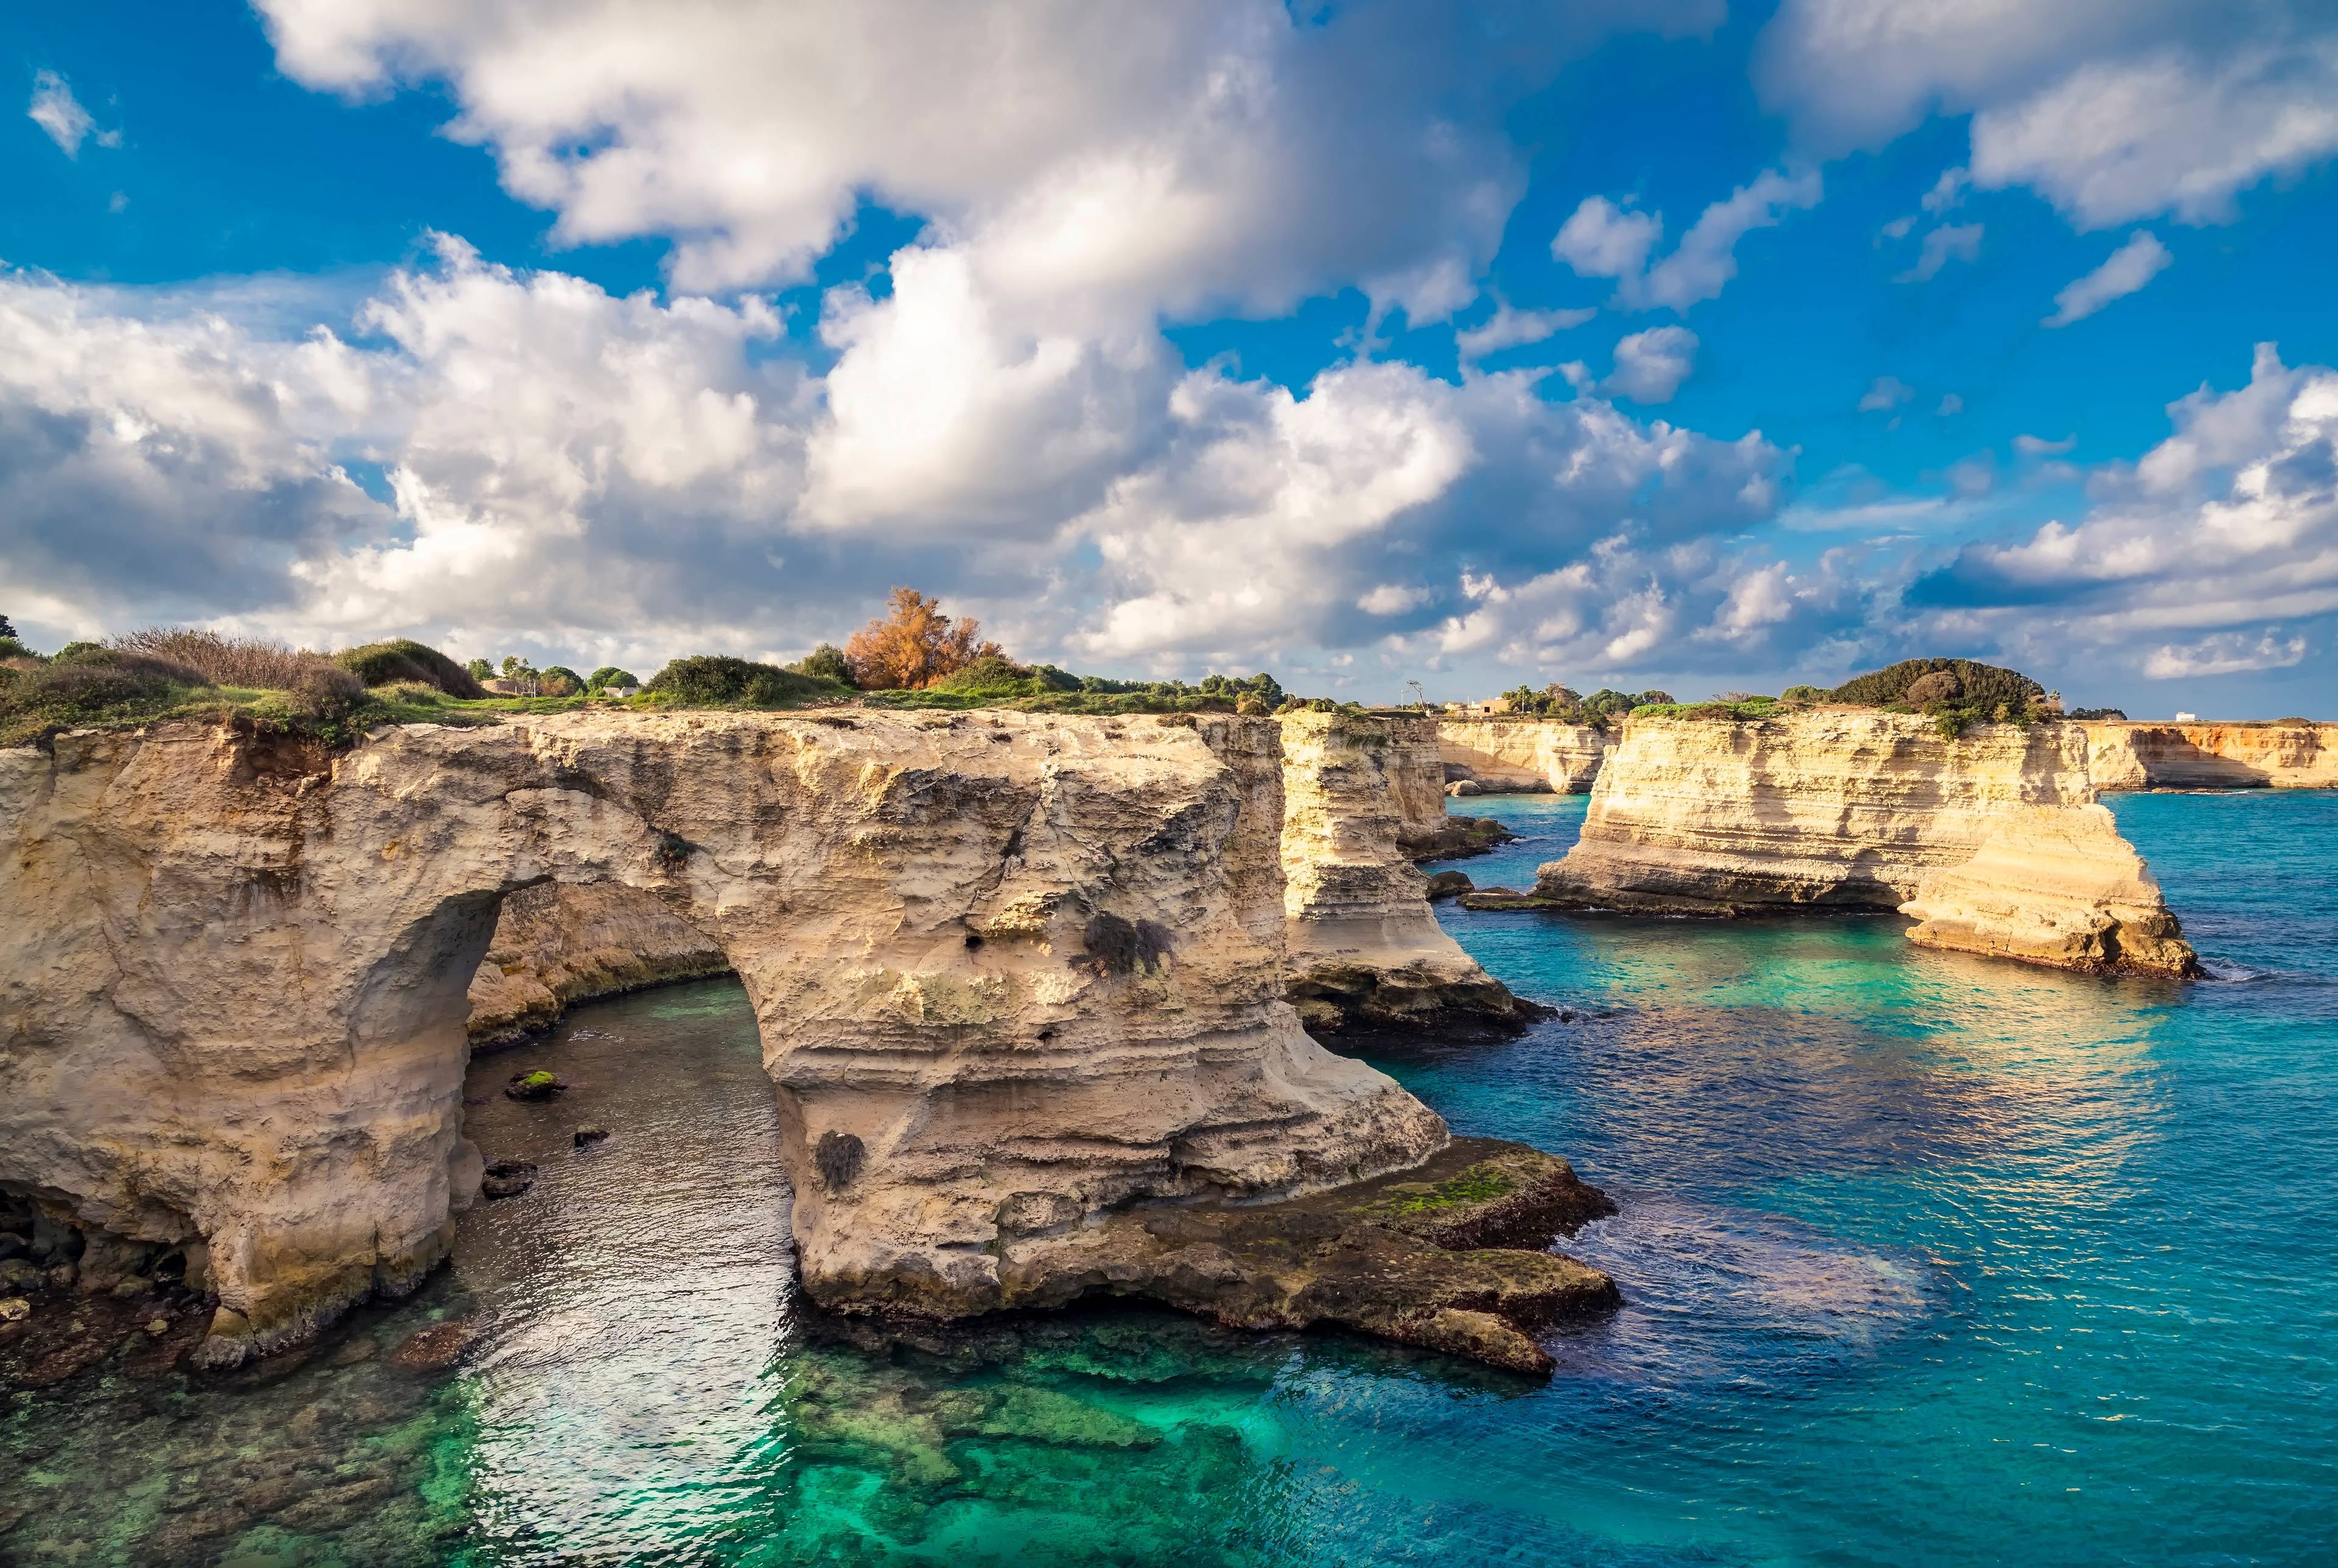 From the Ionian to the Adriatic: the Two Coasts and Two Seas of Salento